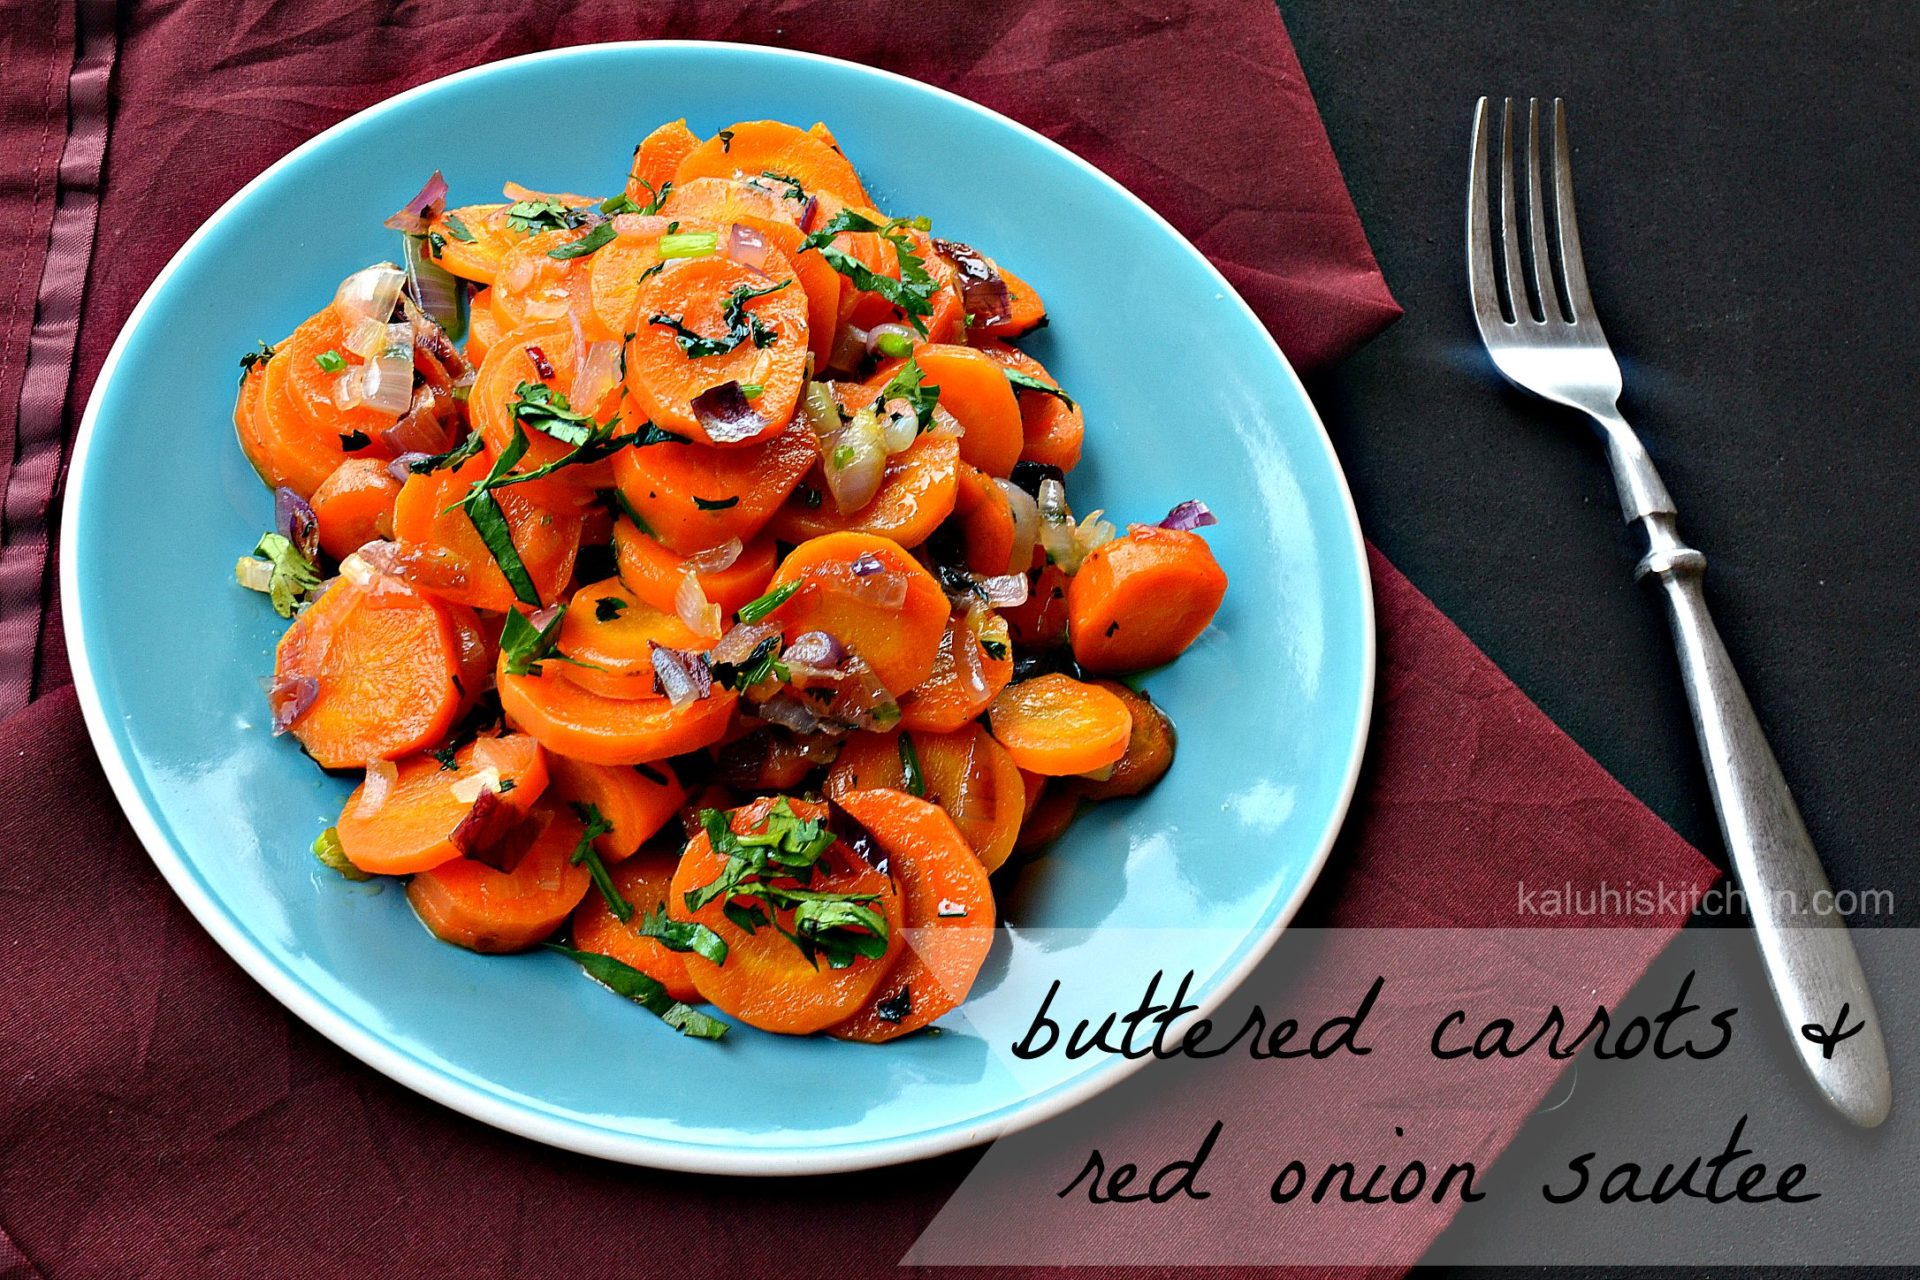 buttered carrots and red onion sautee_how to prepare carrots_easy carrot recipe_kaluhiskitchen.com_